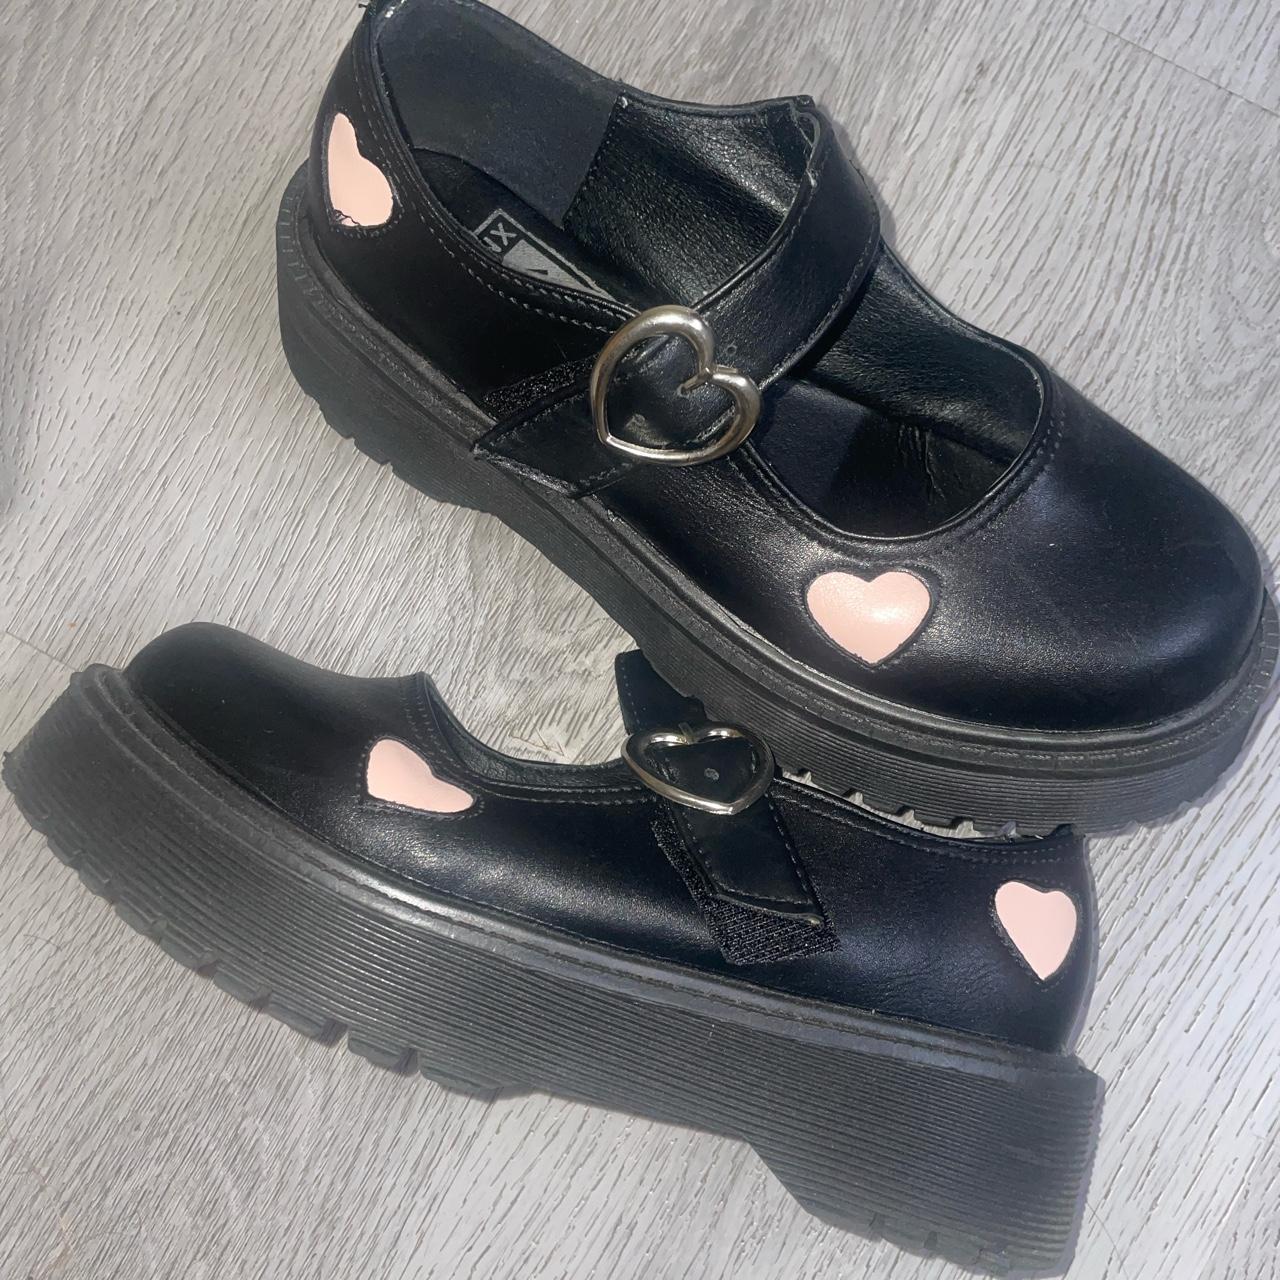 matte mary jane pumps with pink hearts - Depop